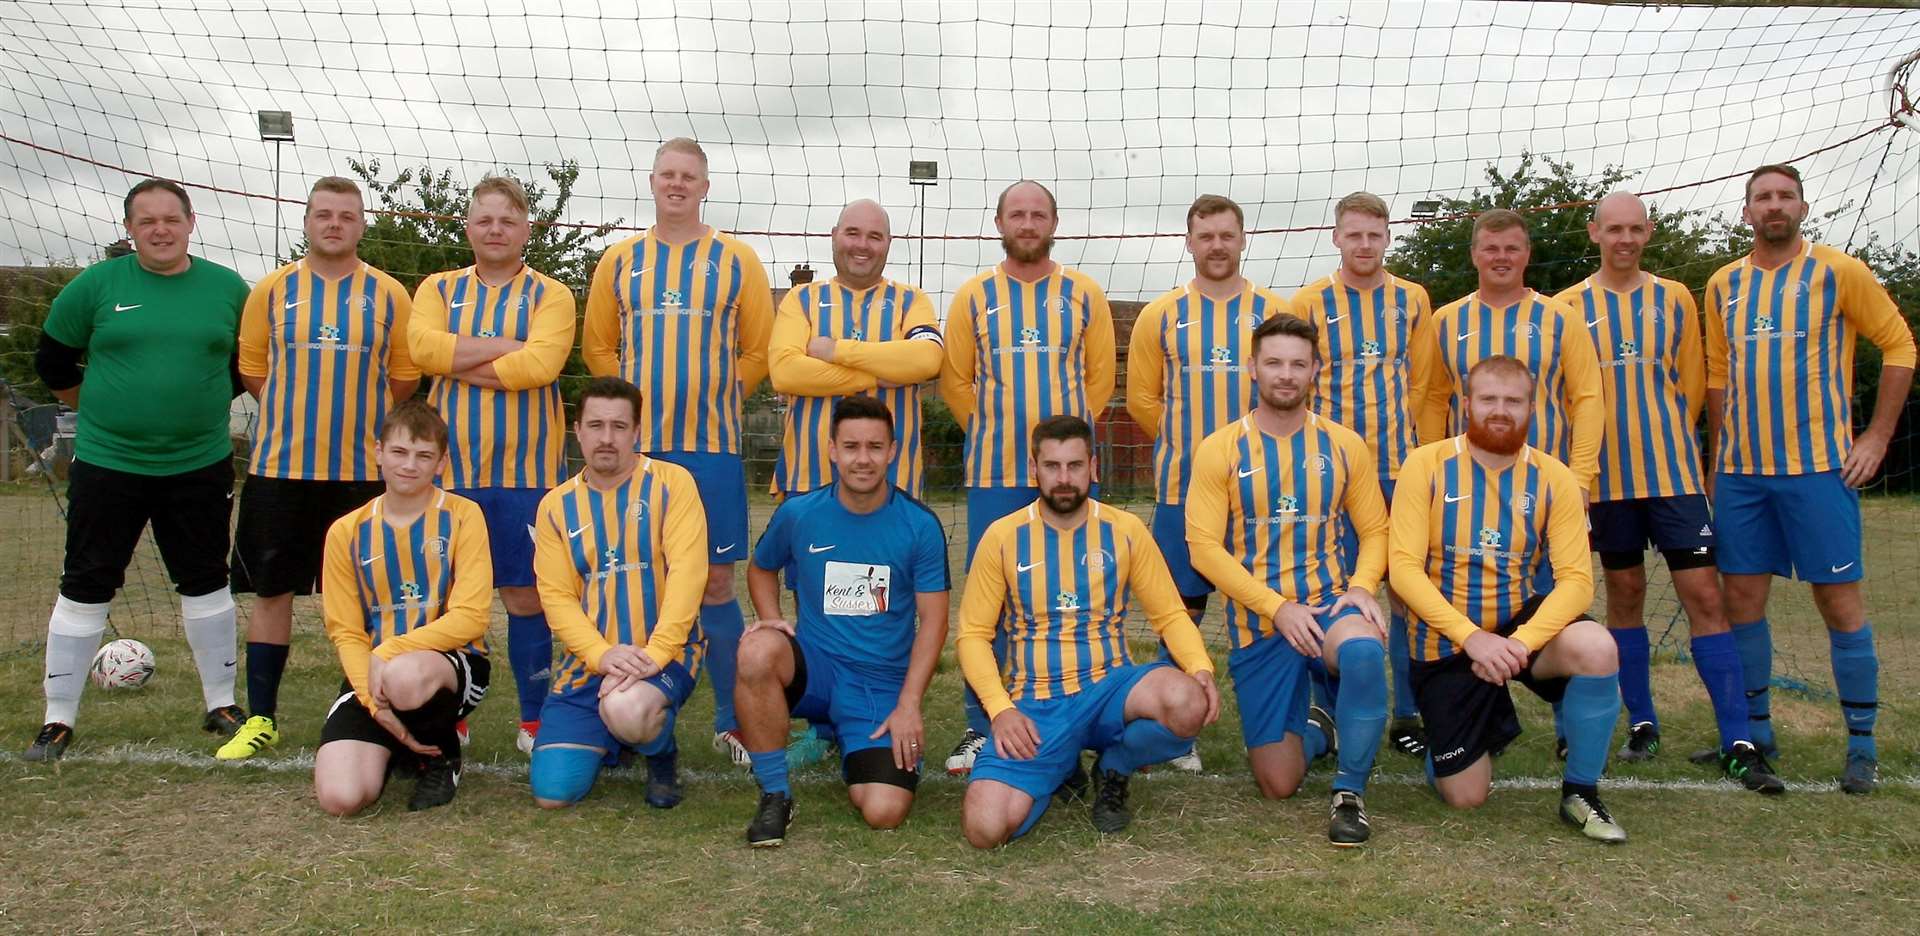 The lads from the Sheerness East team